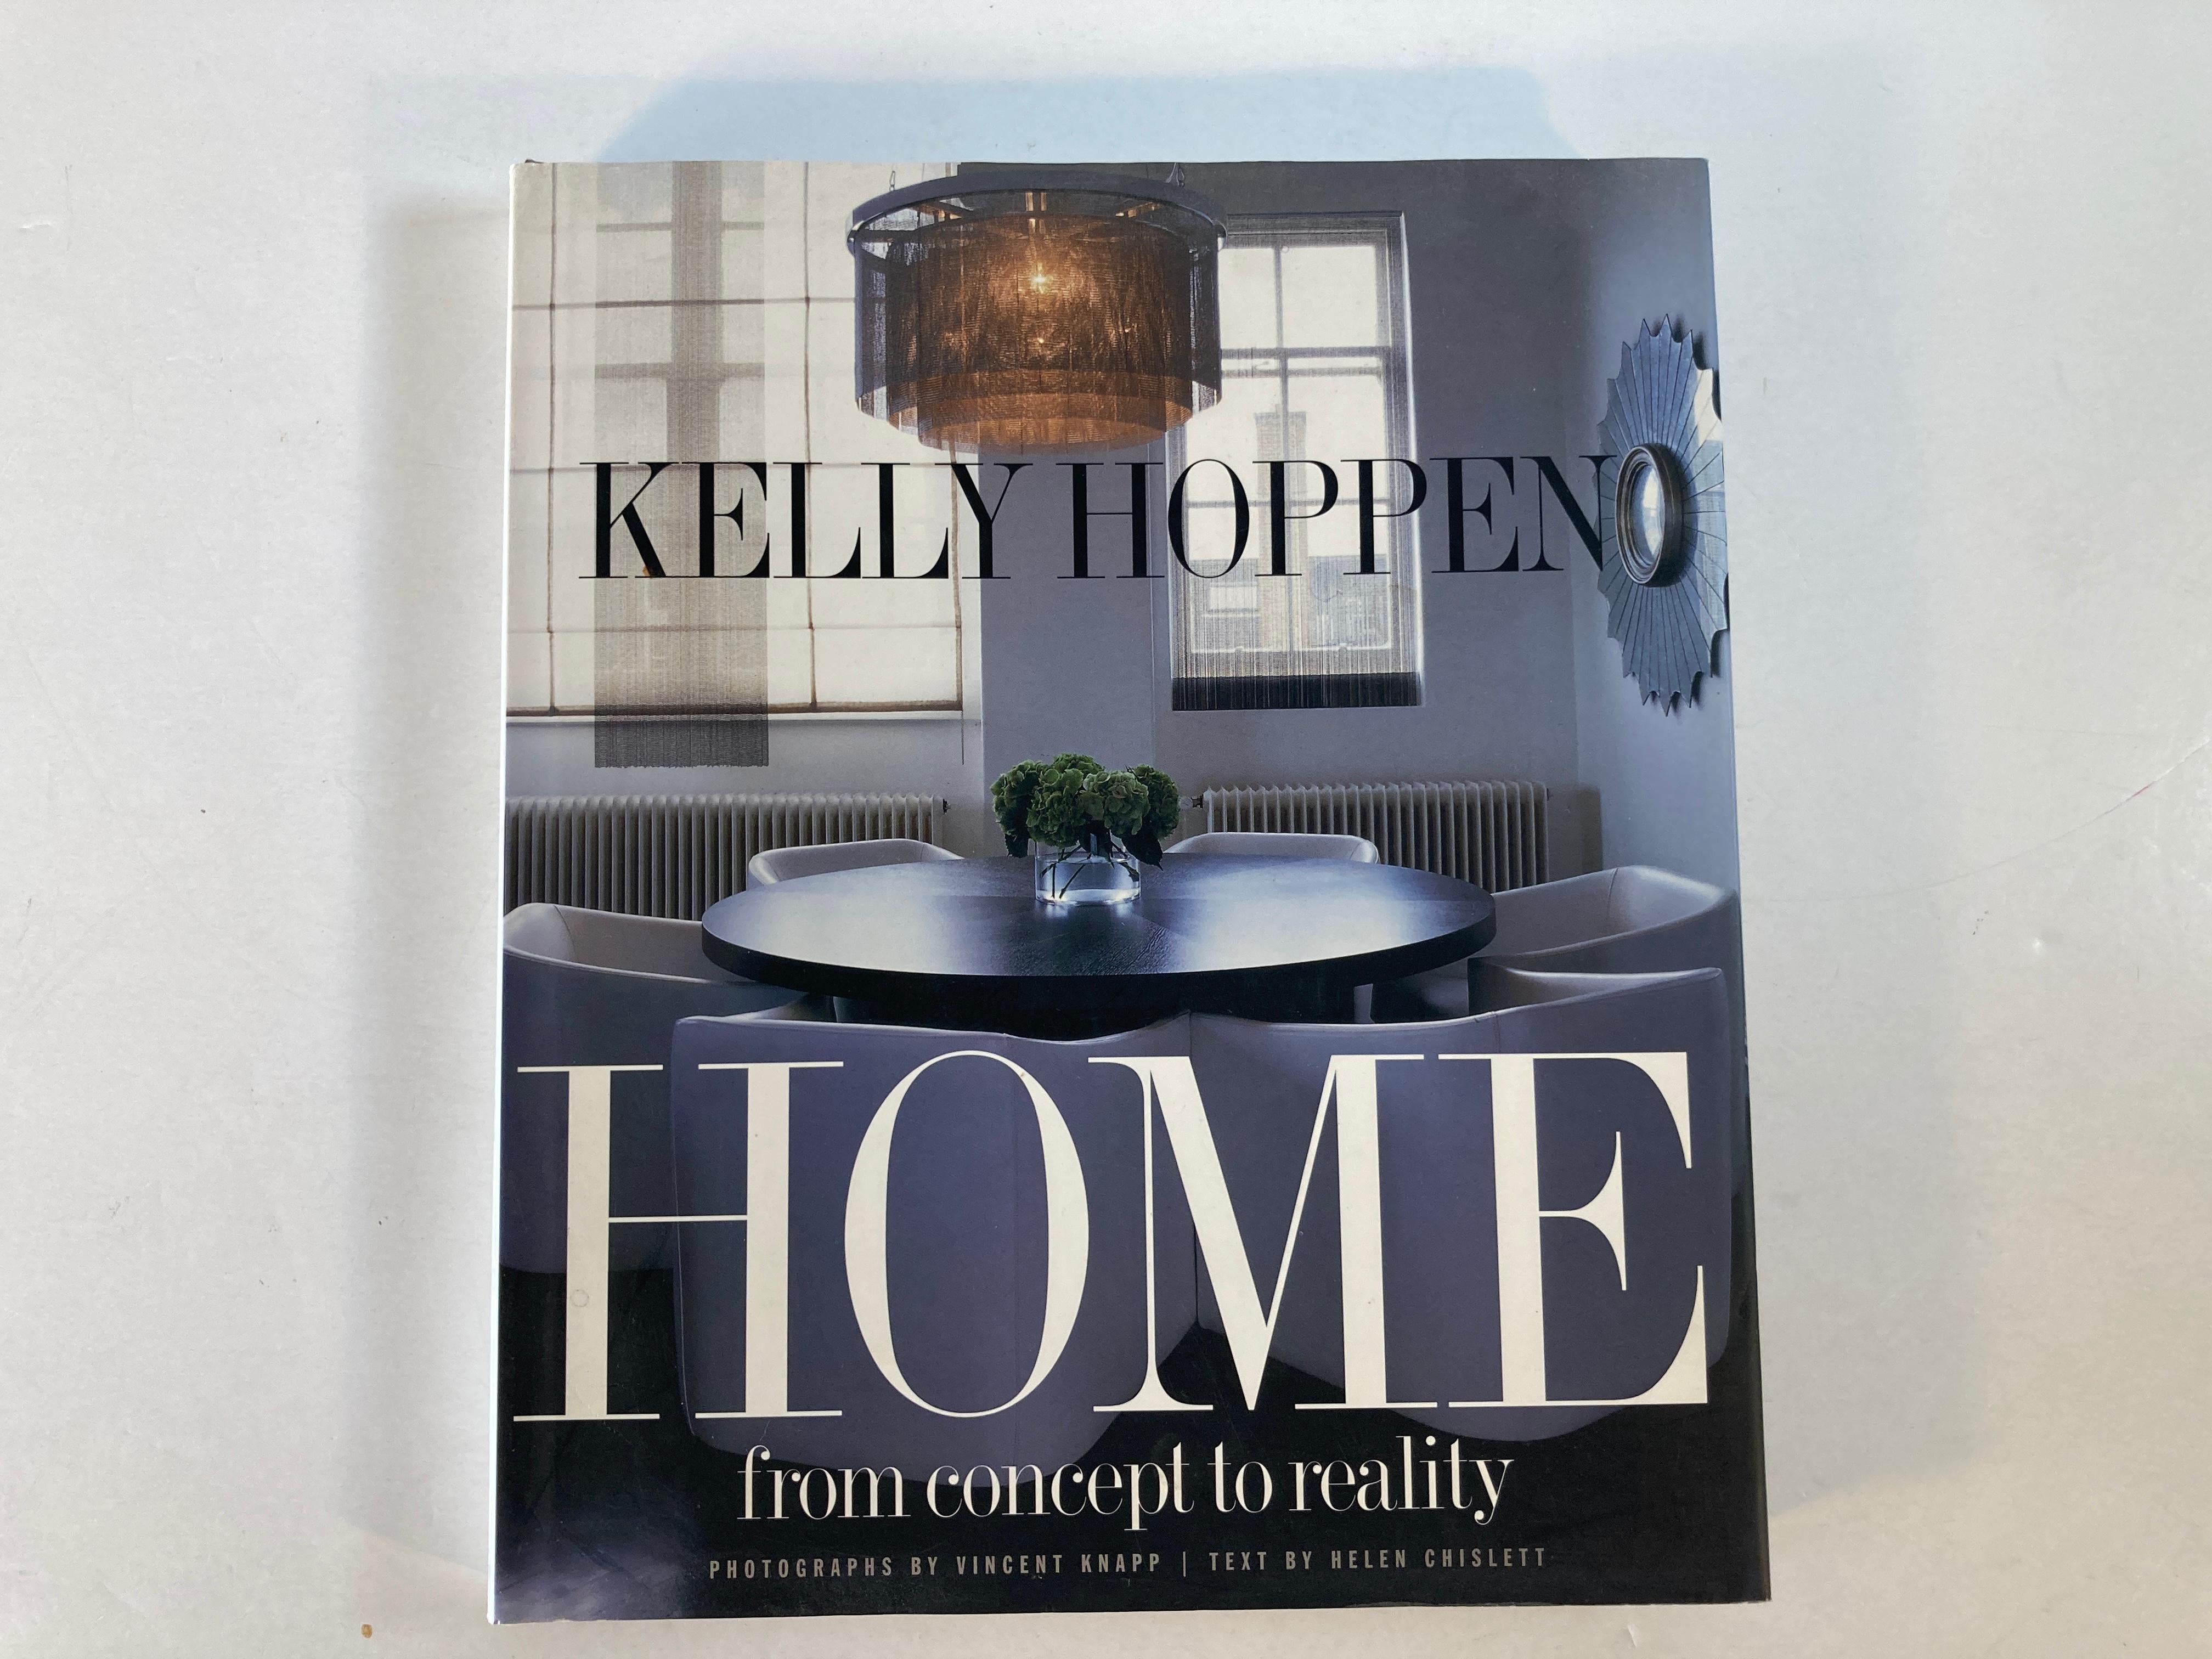 Kelly Hoppen Home: From Concept to Reality
Book by Helen Chislet.
Kelly Hoppen Home is the ultimate decorating book, offering the chance to learn from the world-renowned designer's chic, modern design philosophy. From an idea's conception, through